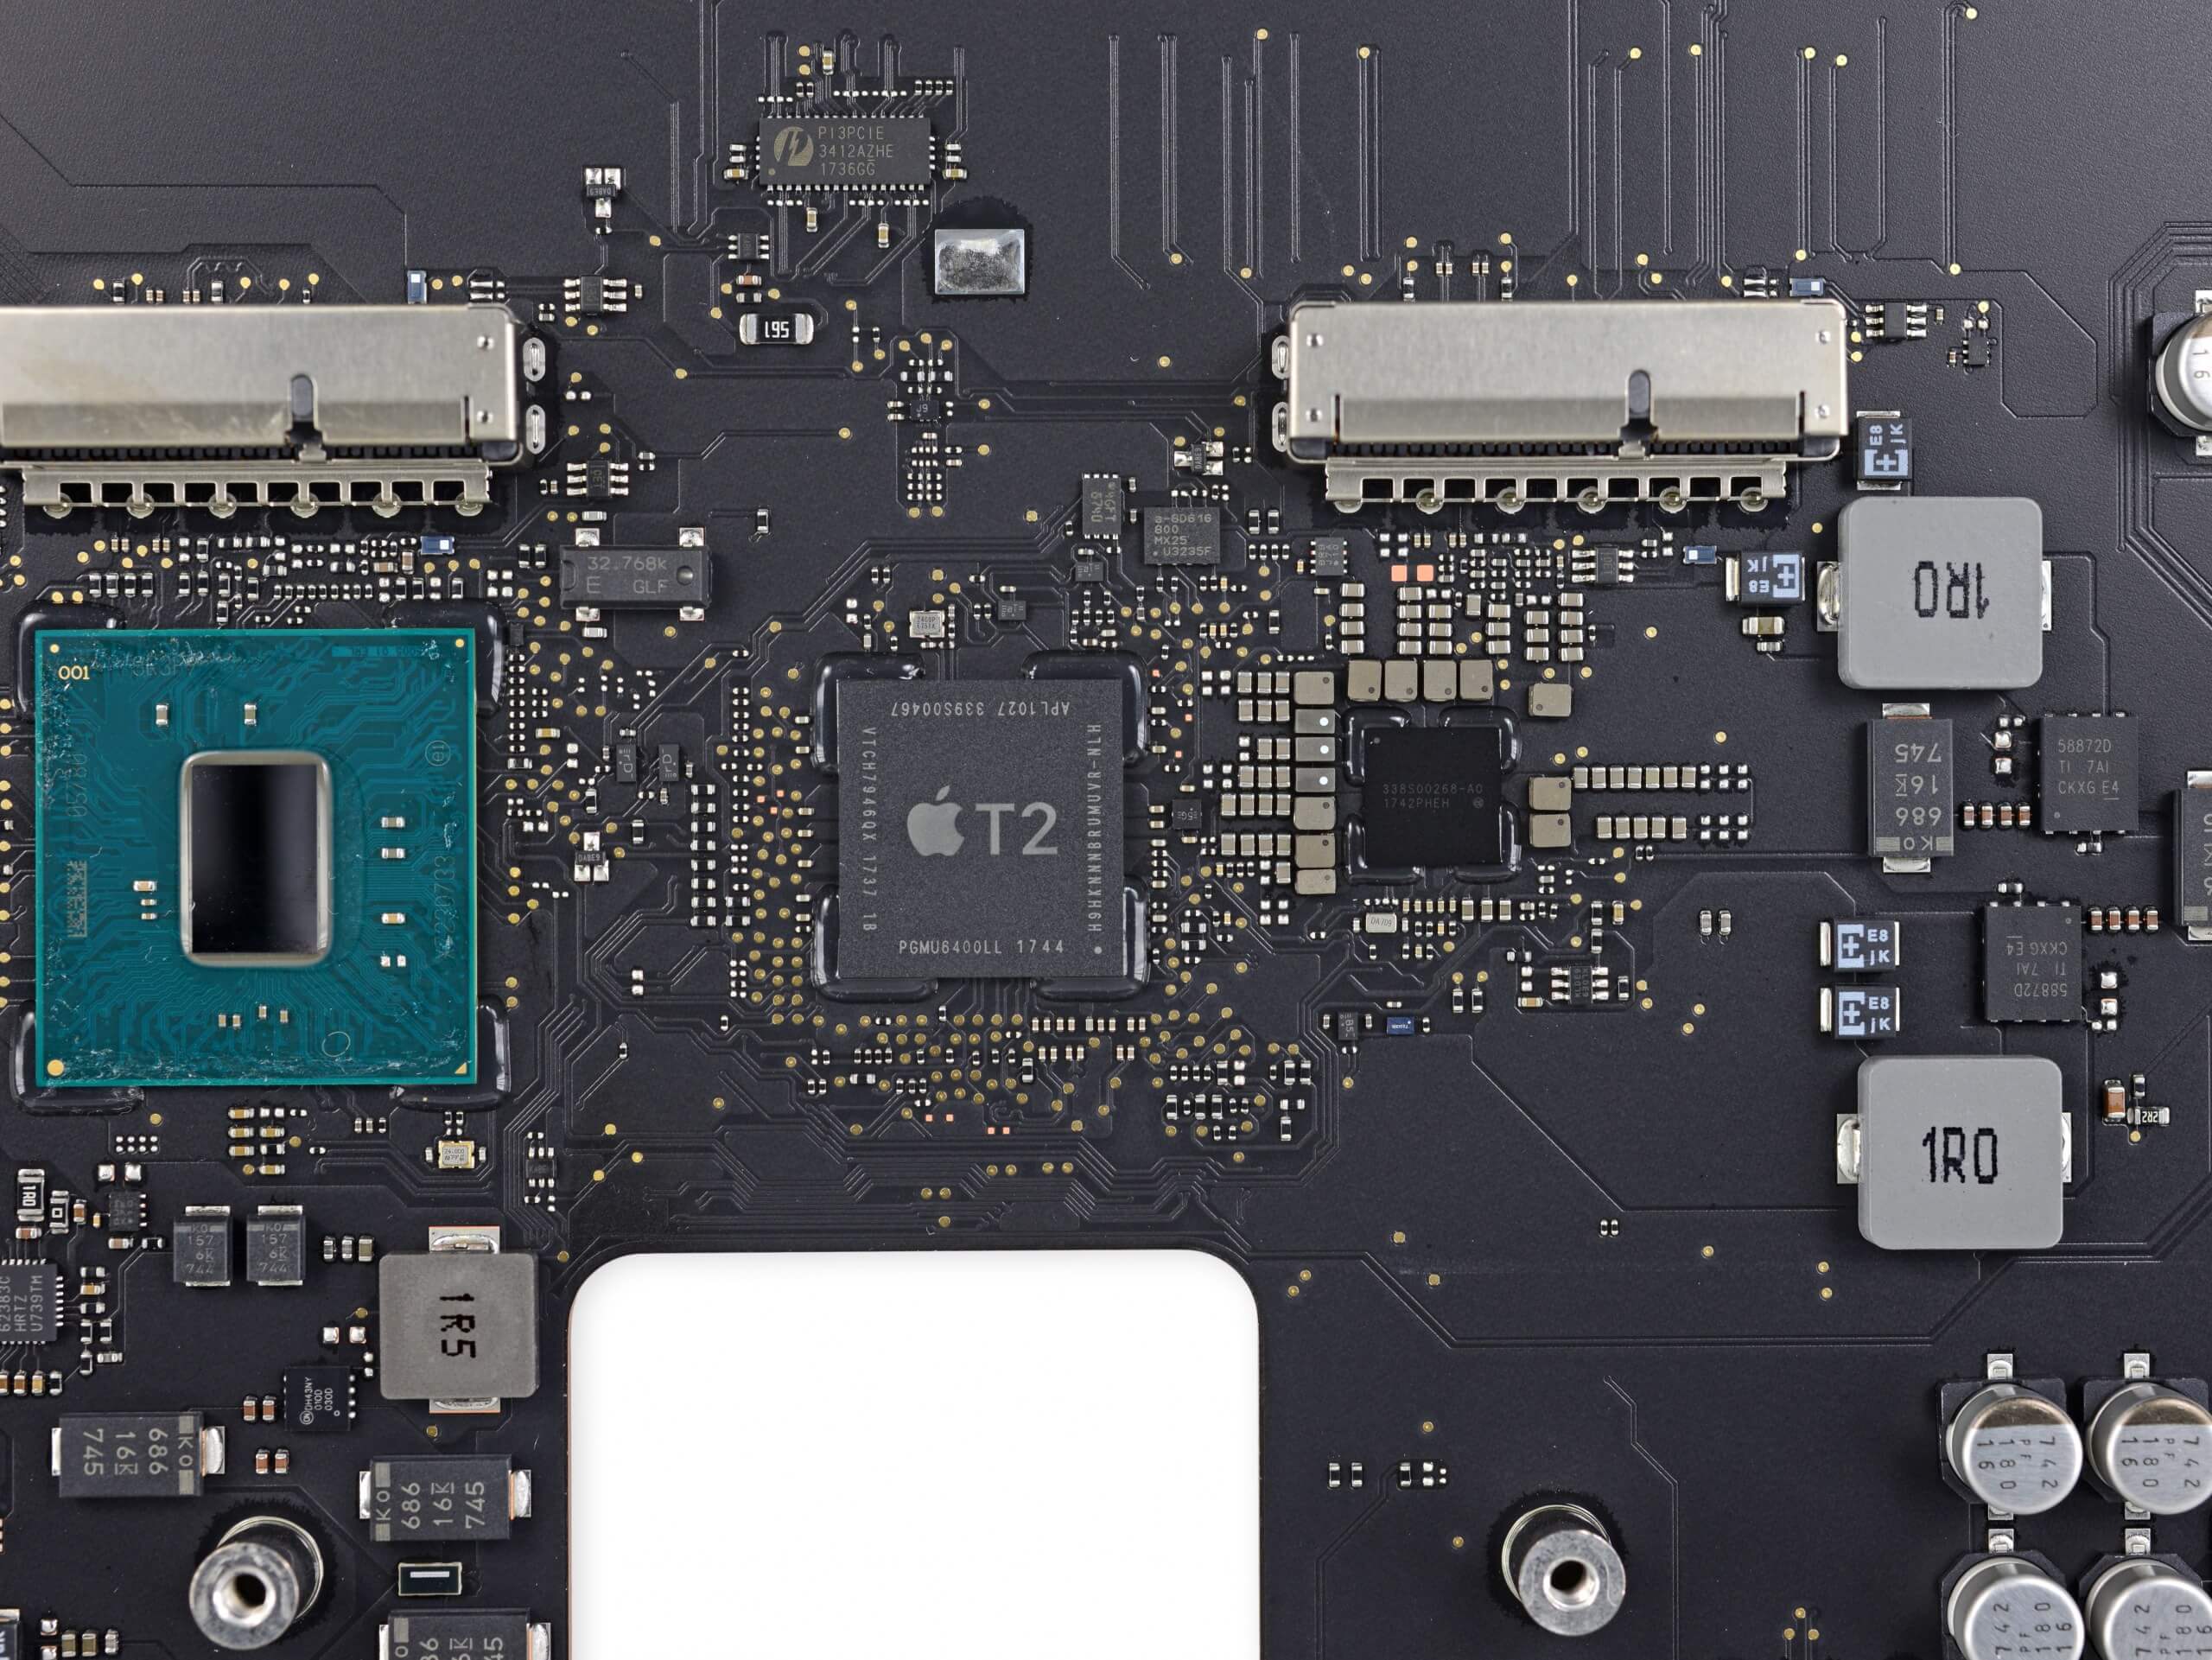 Macs with the T2 security chip are going to waste because they are difficult to repair